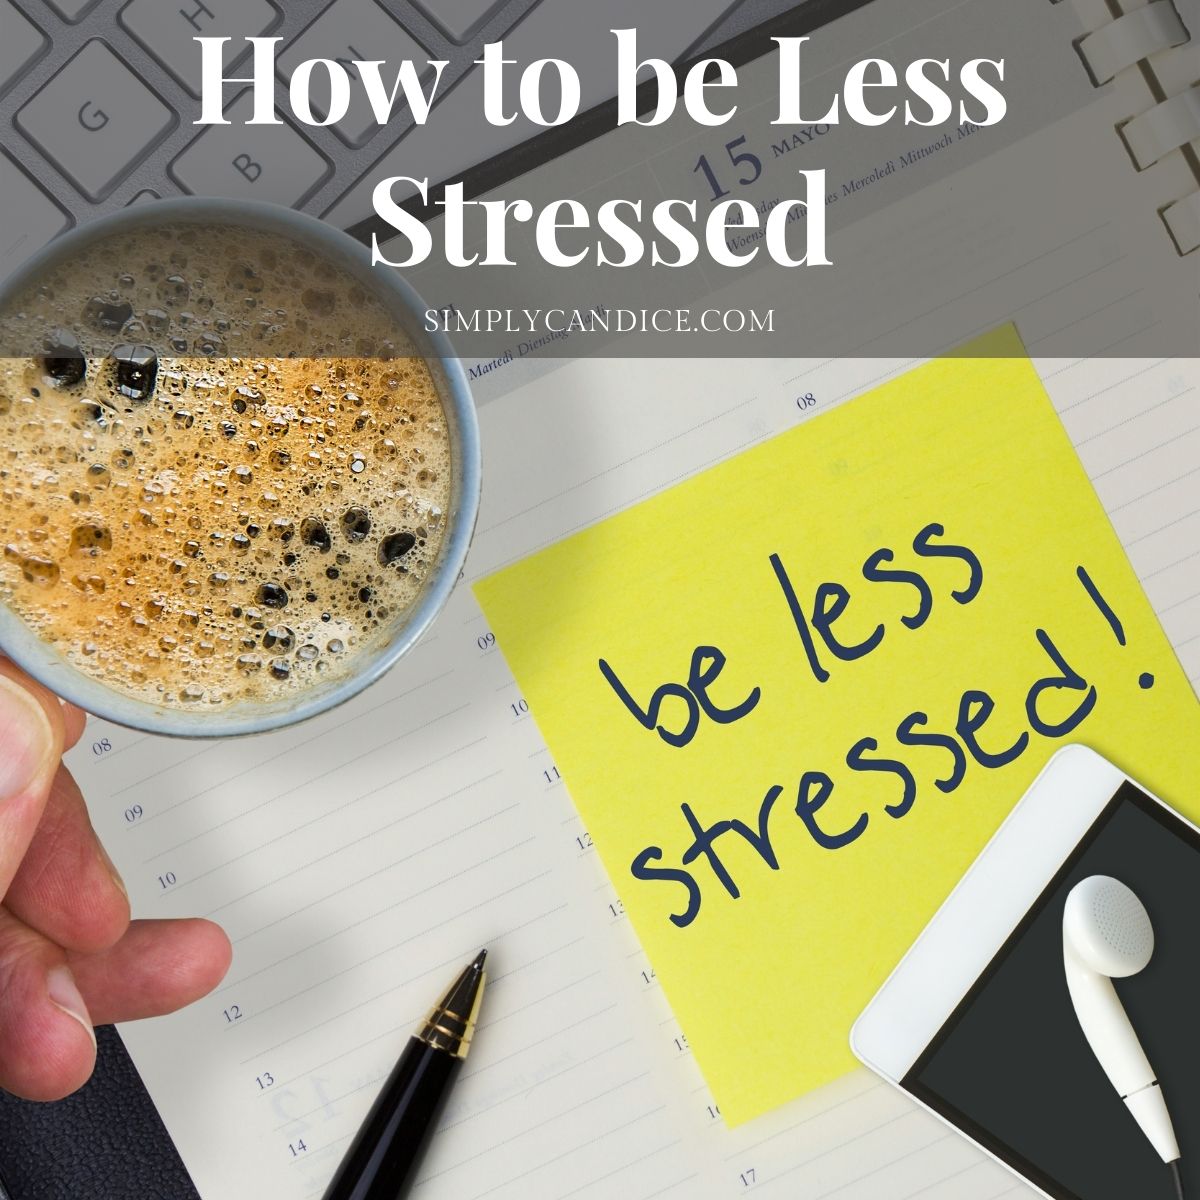 How to be less stressed and overwhelmed